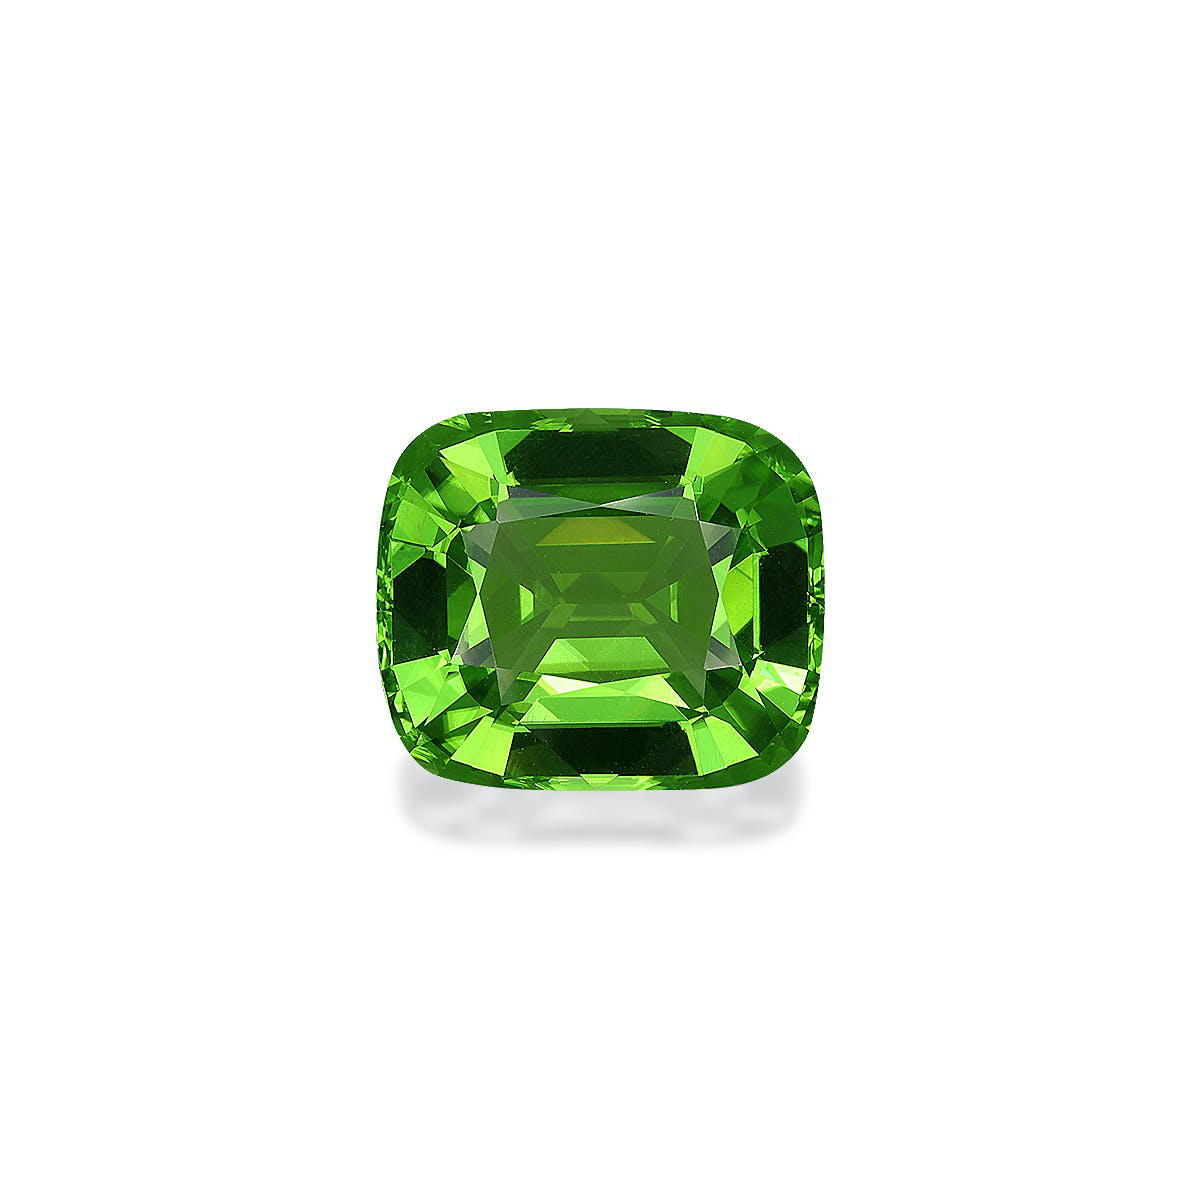 Picture of Vivid Green Peridot 8.79ct - 13x11mm (PD0307)